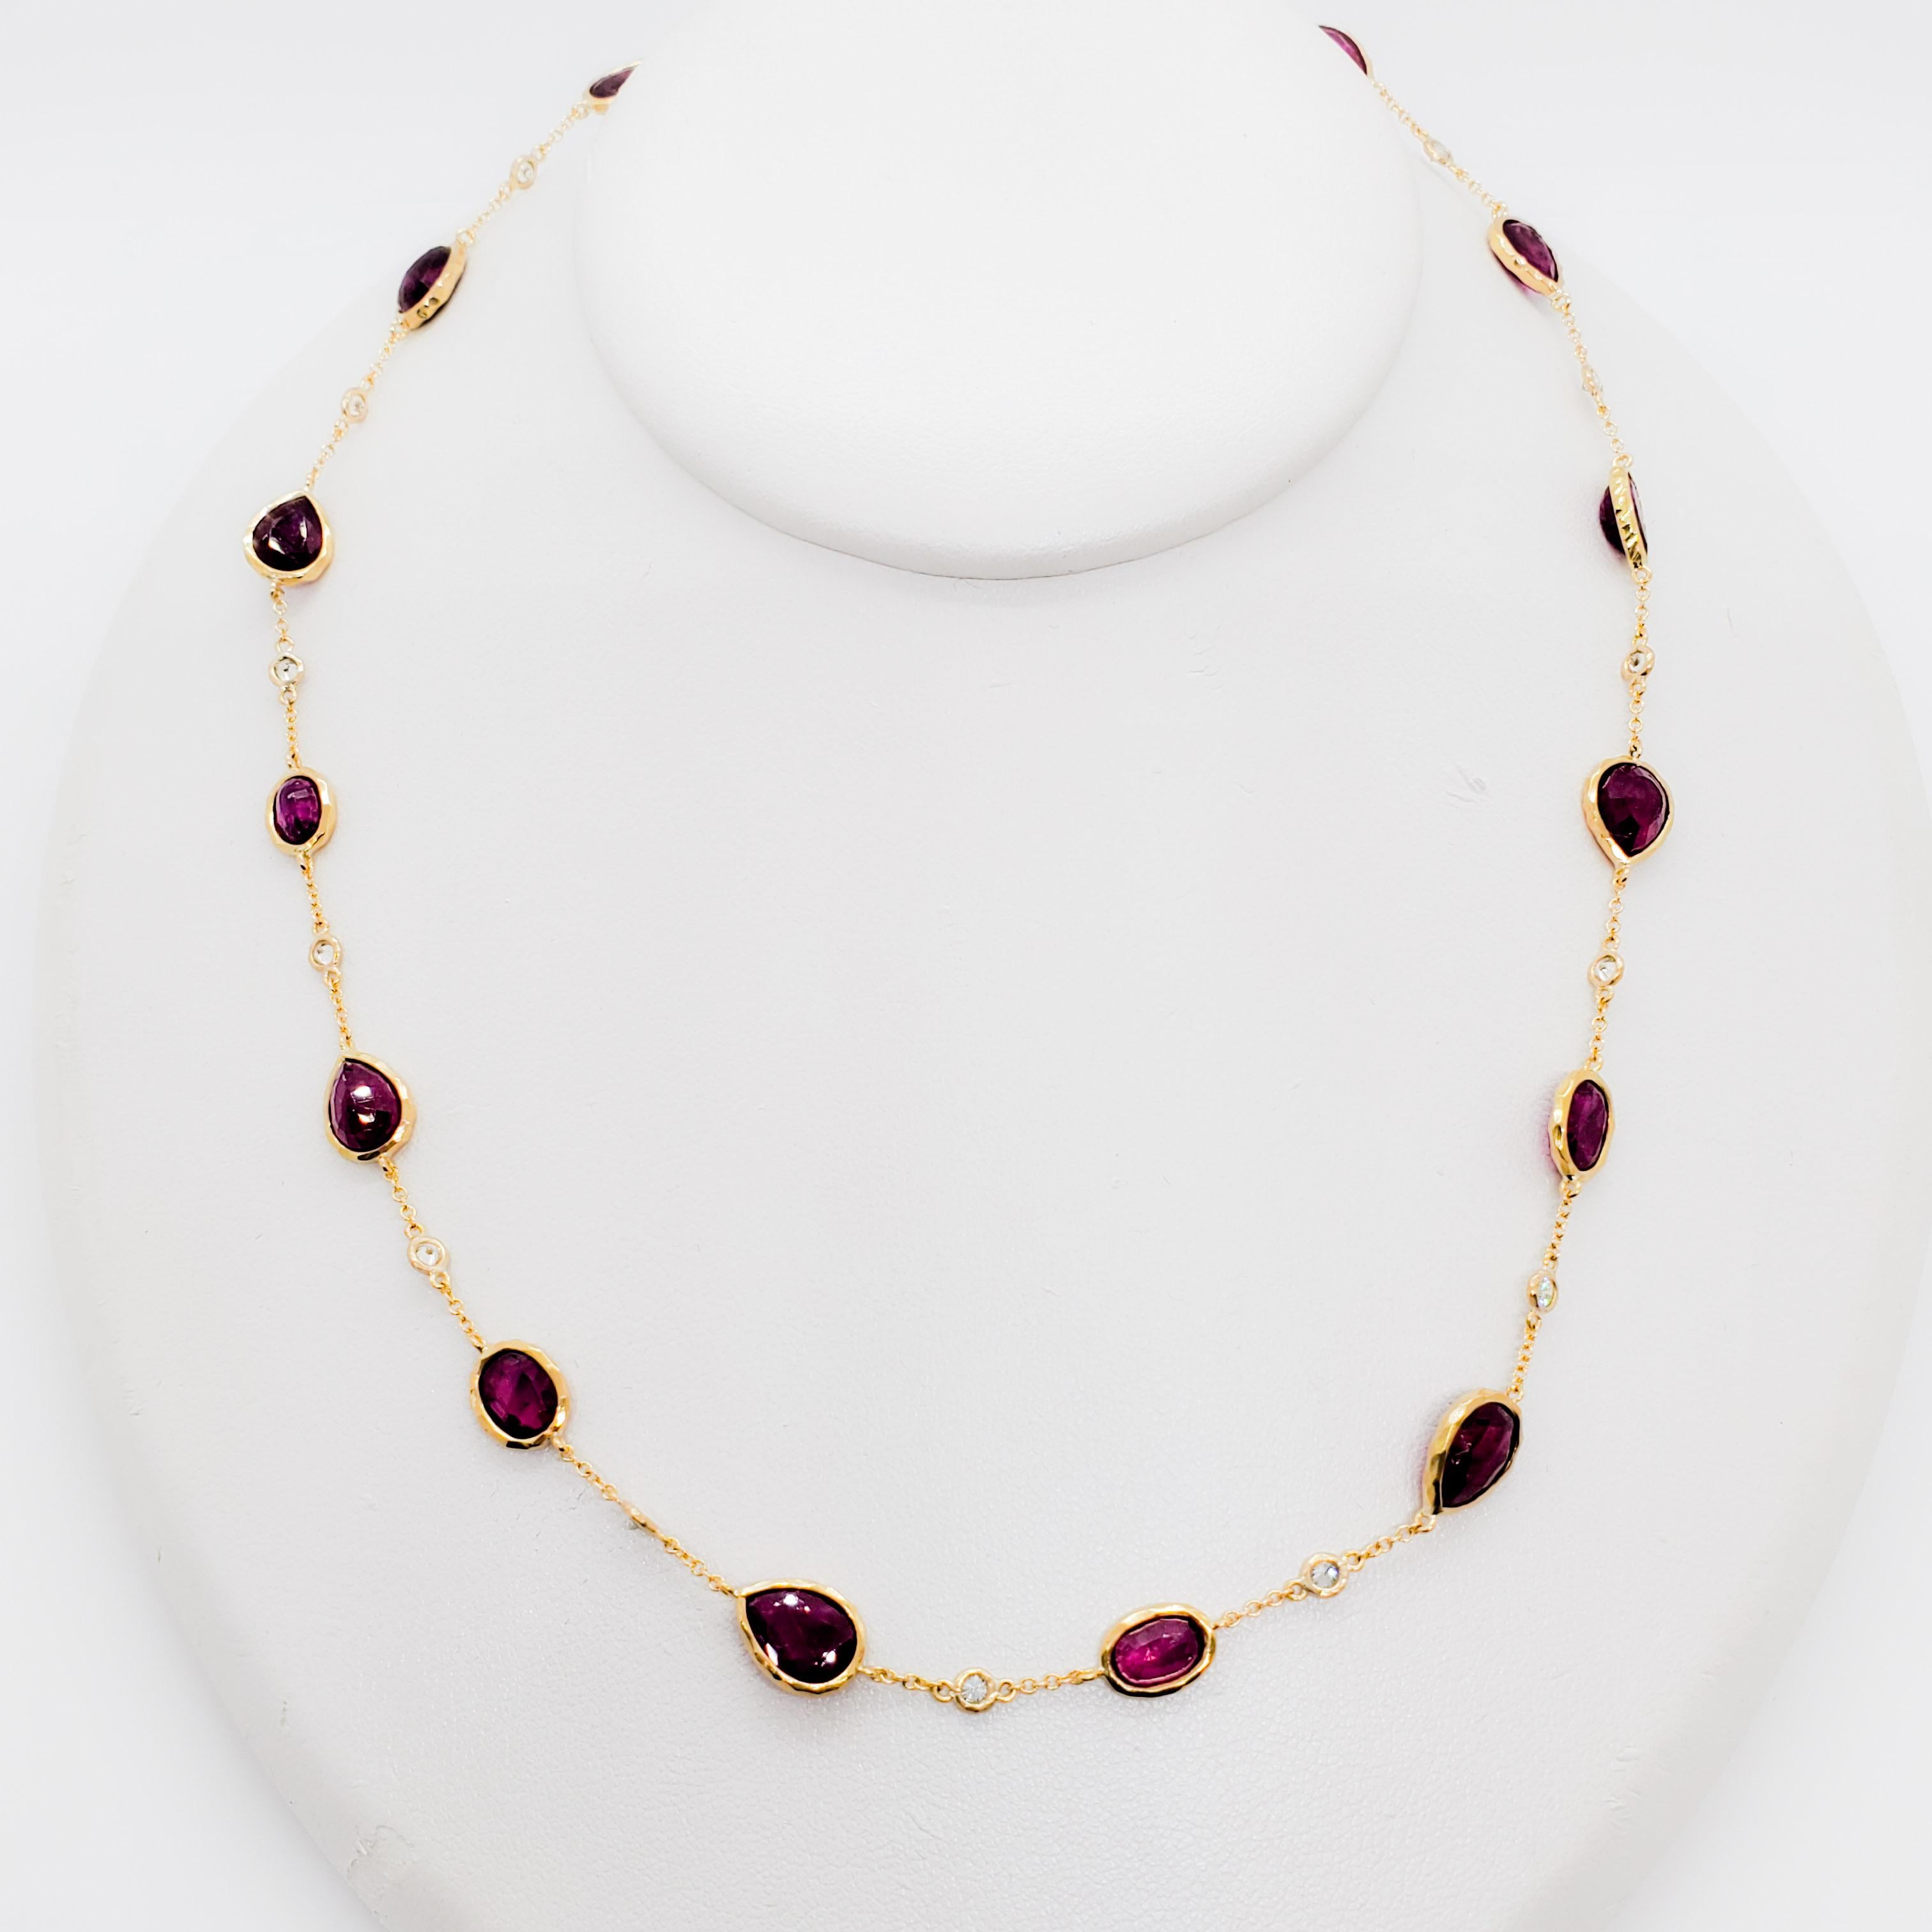 Stunning necklace showcasing 14 ruby multishape stones and several diamond rounds.  All gemstones and diamonds are very good quality with depth of color and brightness.  Length of necklace is 16